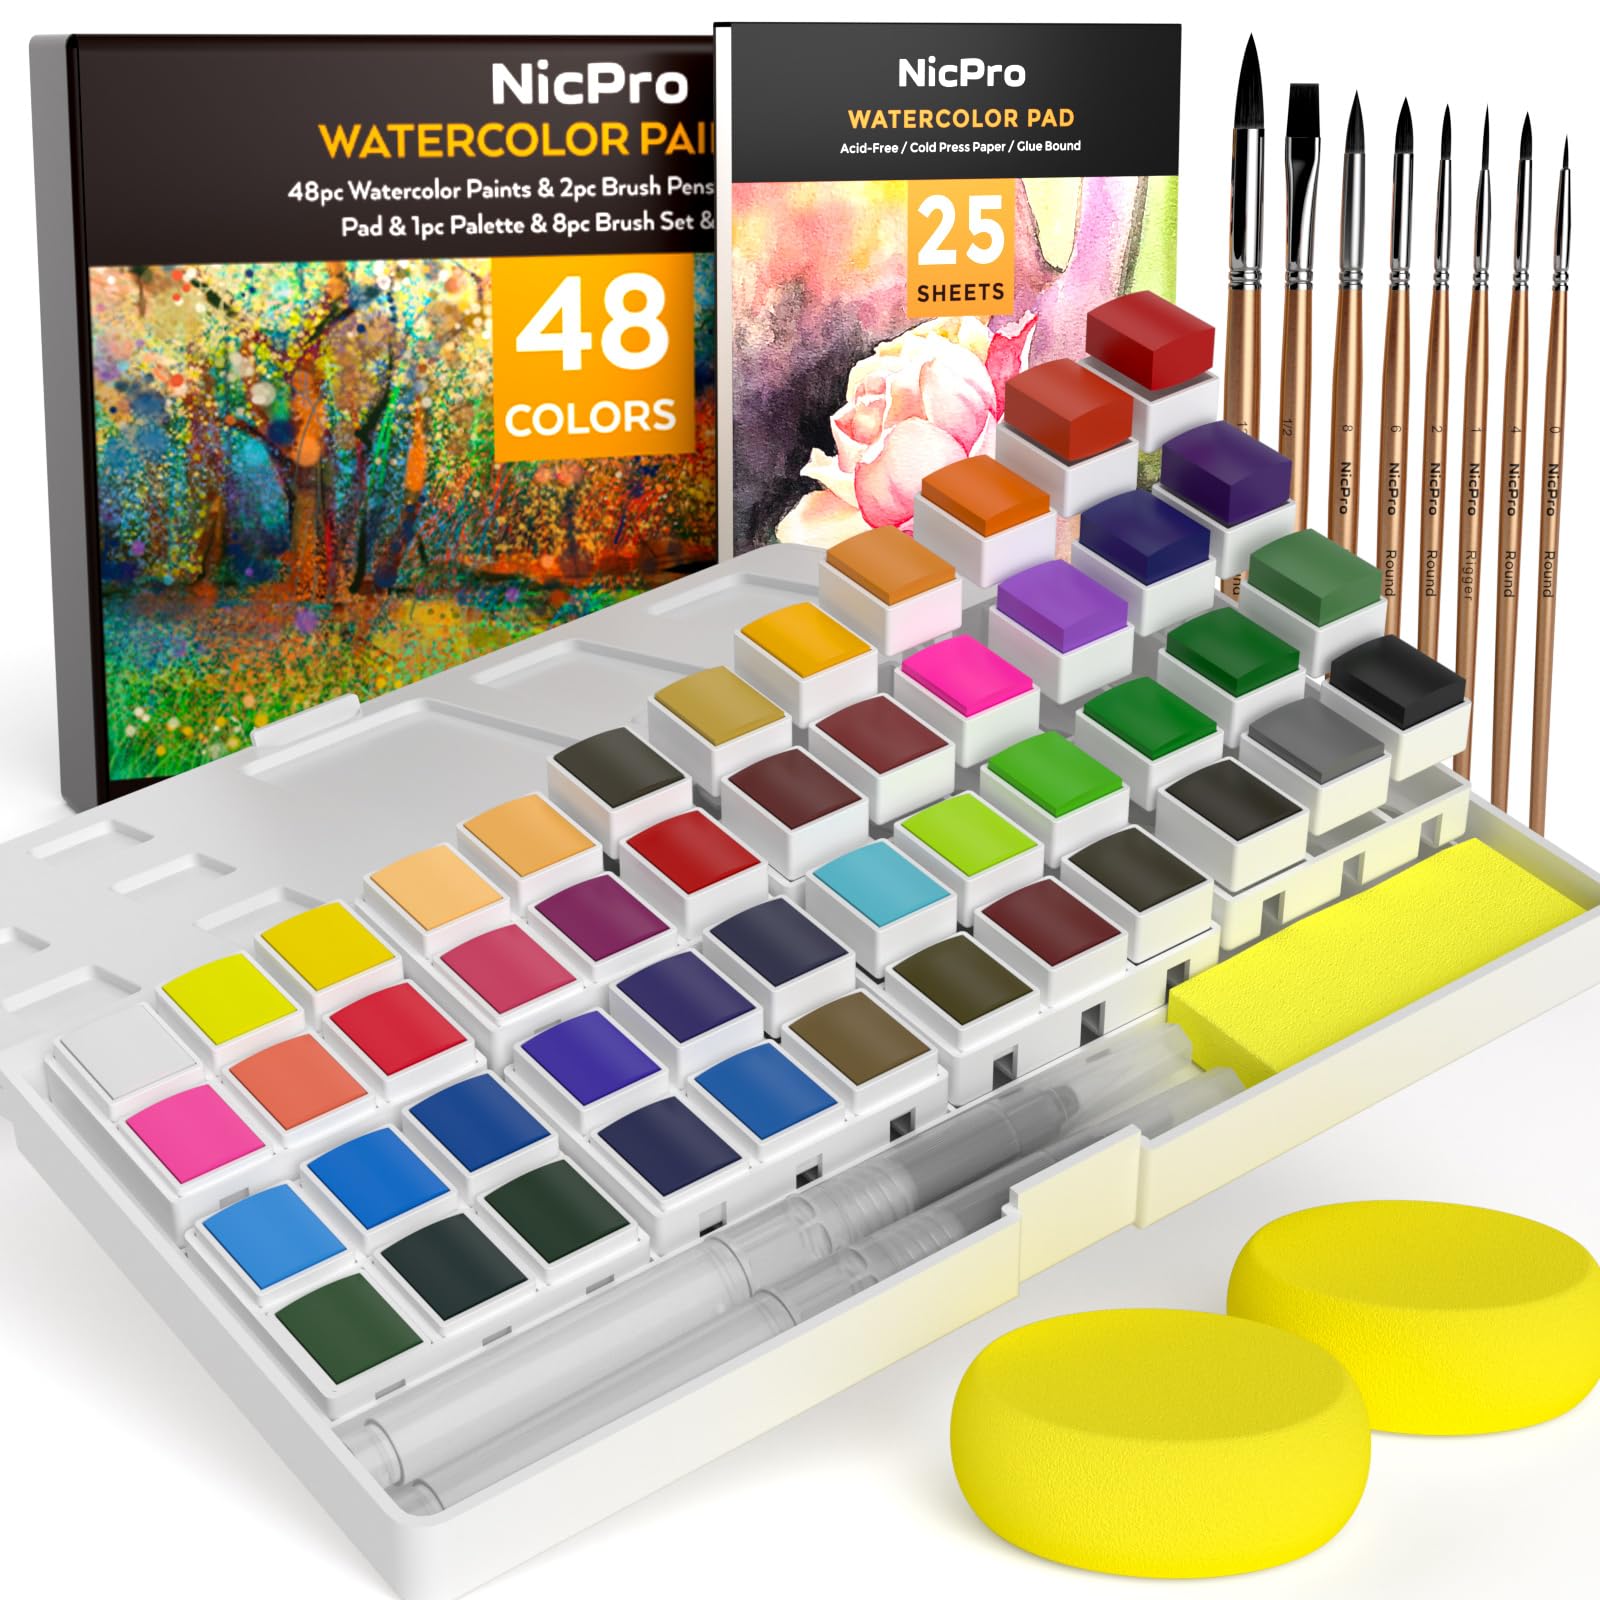 Watercolor Paint Set, Taotree 48-Color Watercolors Cake & a Brush a  Refillable Water Brush Pen, Portable Water Colors Paints Set for Kids  Children Students Adults Beginner Artists Painting Supplies 